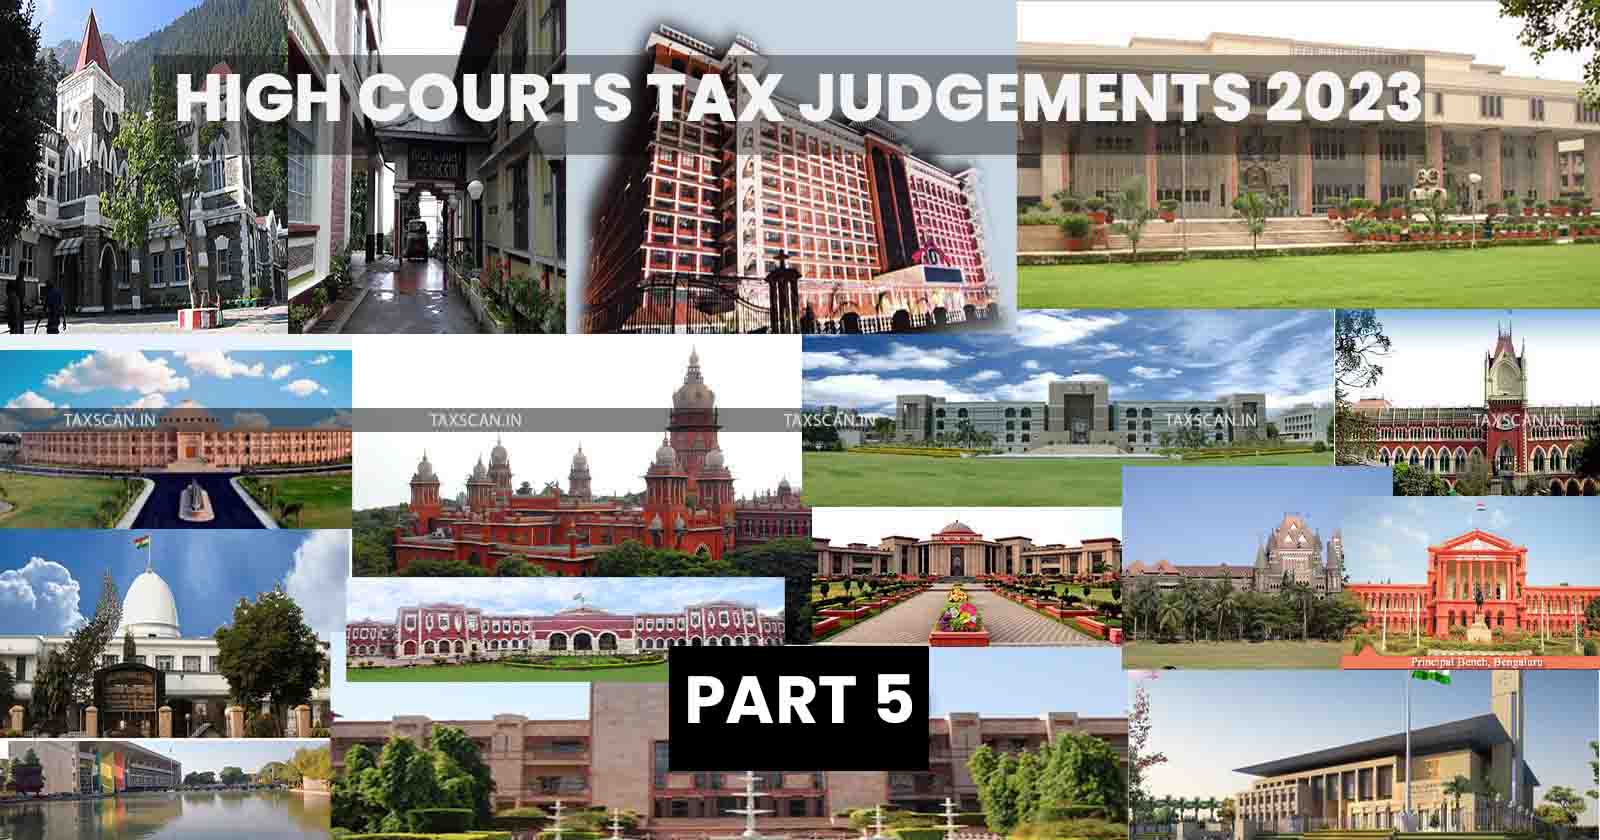 Tax Judgment of High Court - Annual Digest 2023 Part 5 - TAXSCAN